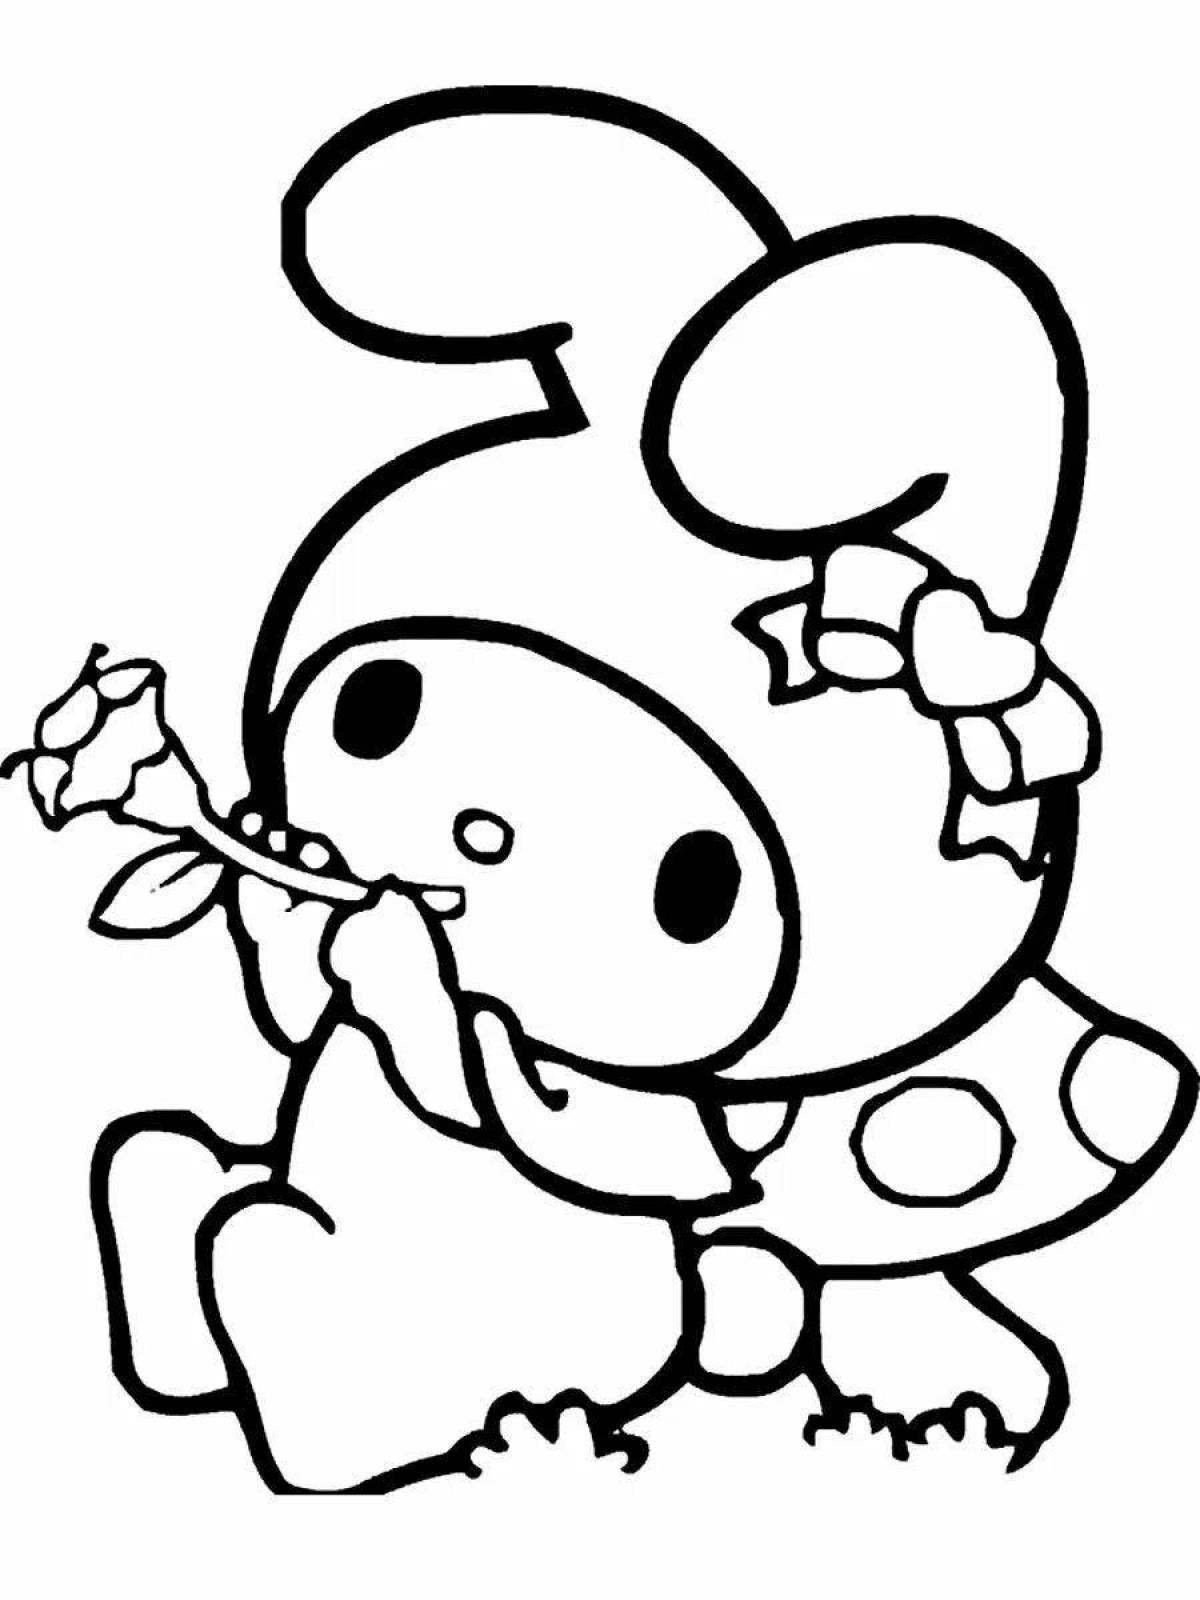 Kuromi exquisite printing coloring page